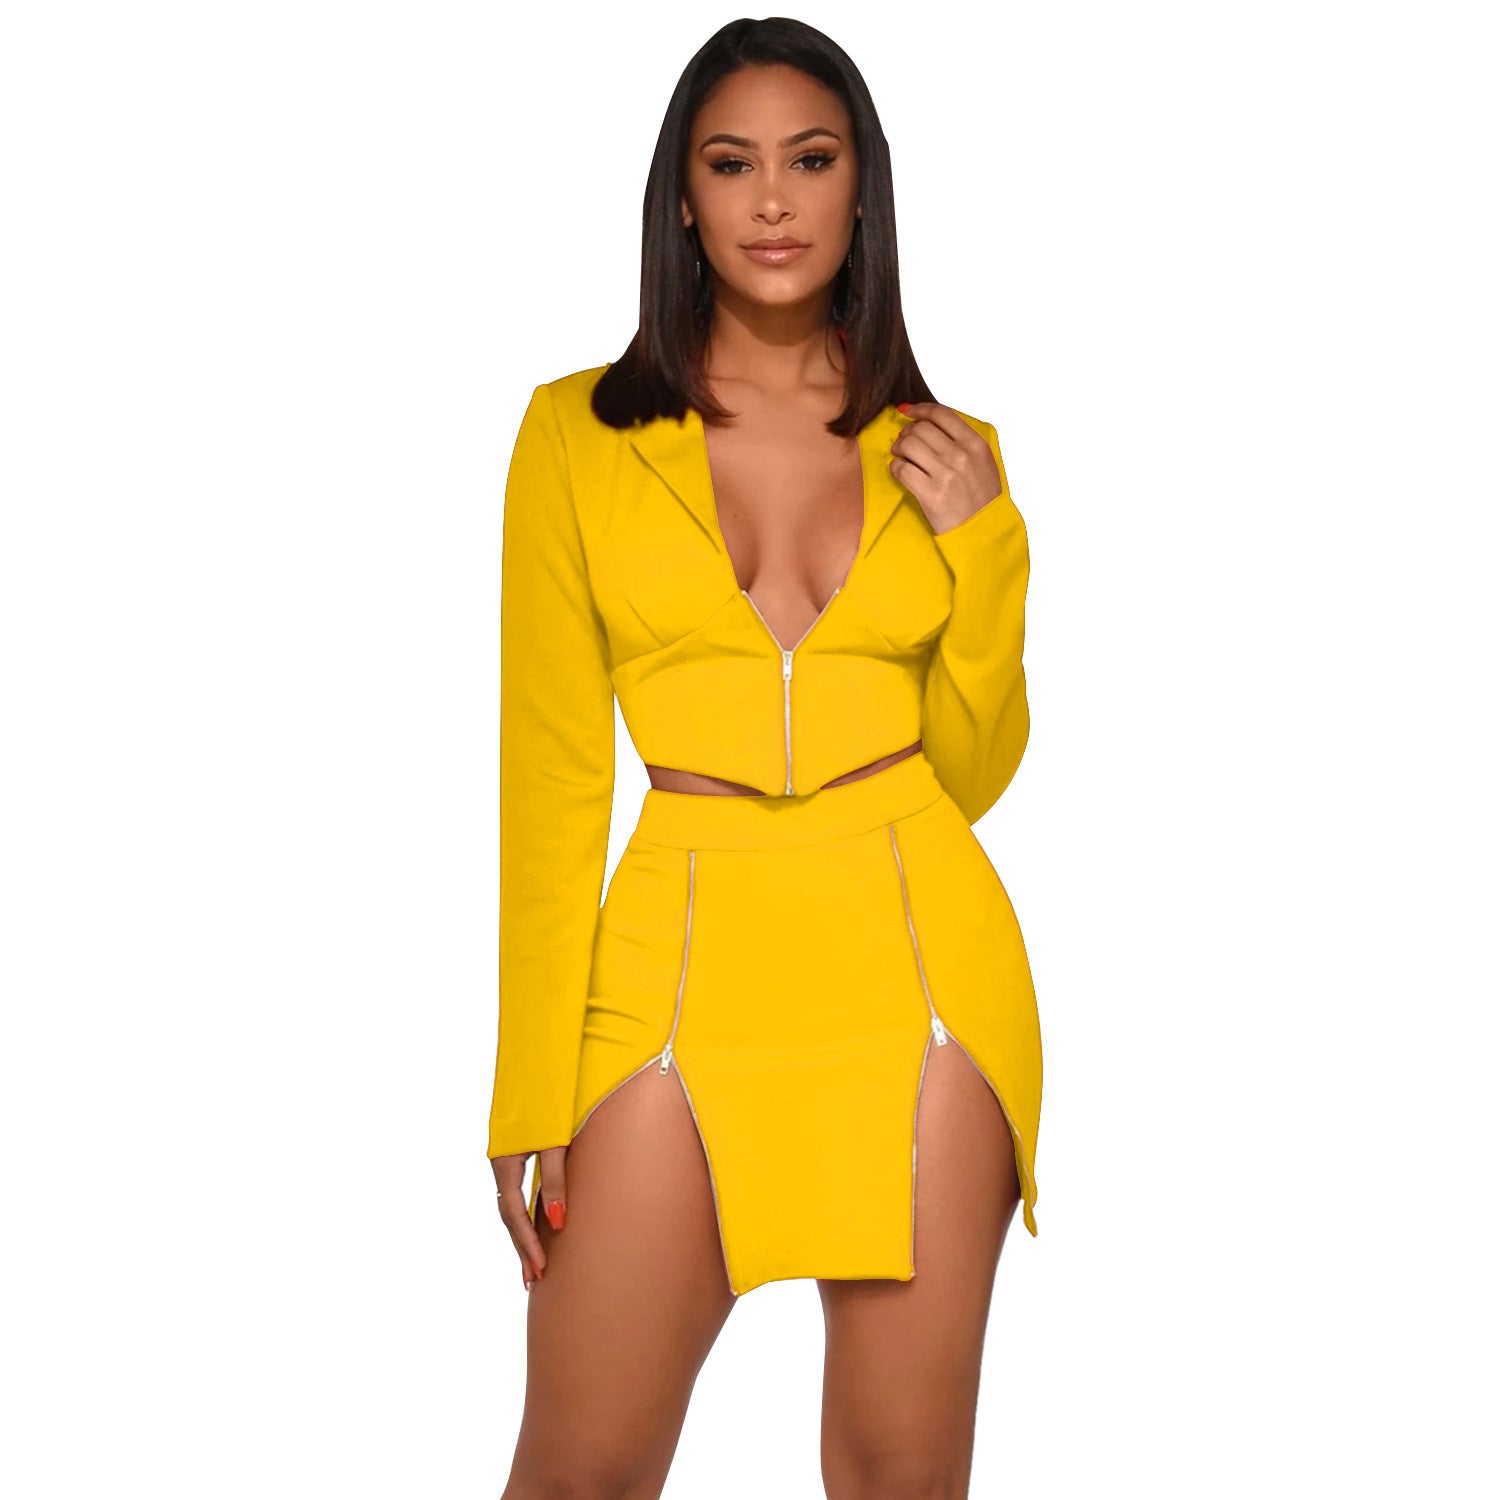 Sexy Two Piece Club Outfits Zipper Long Sleeve Crop Top Blazer and Skirt